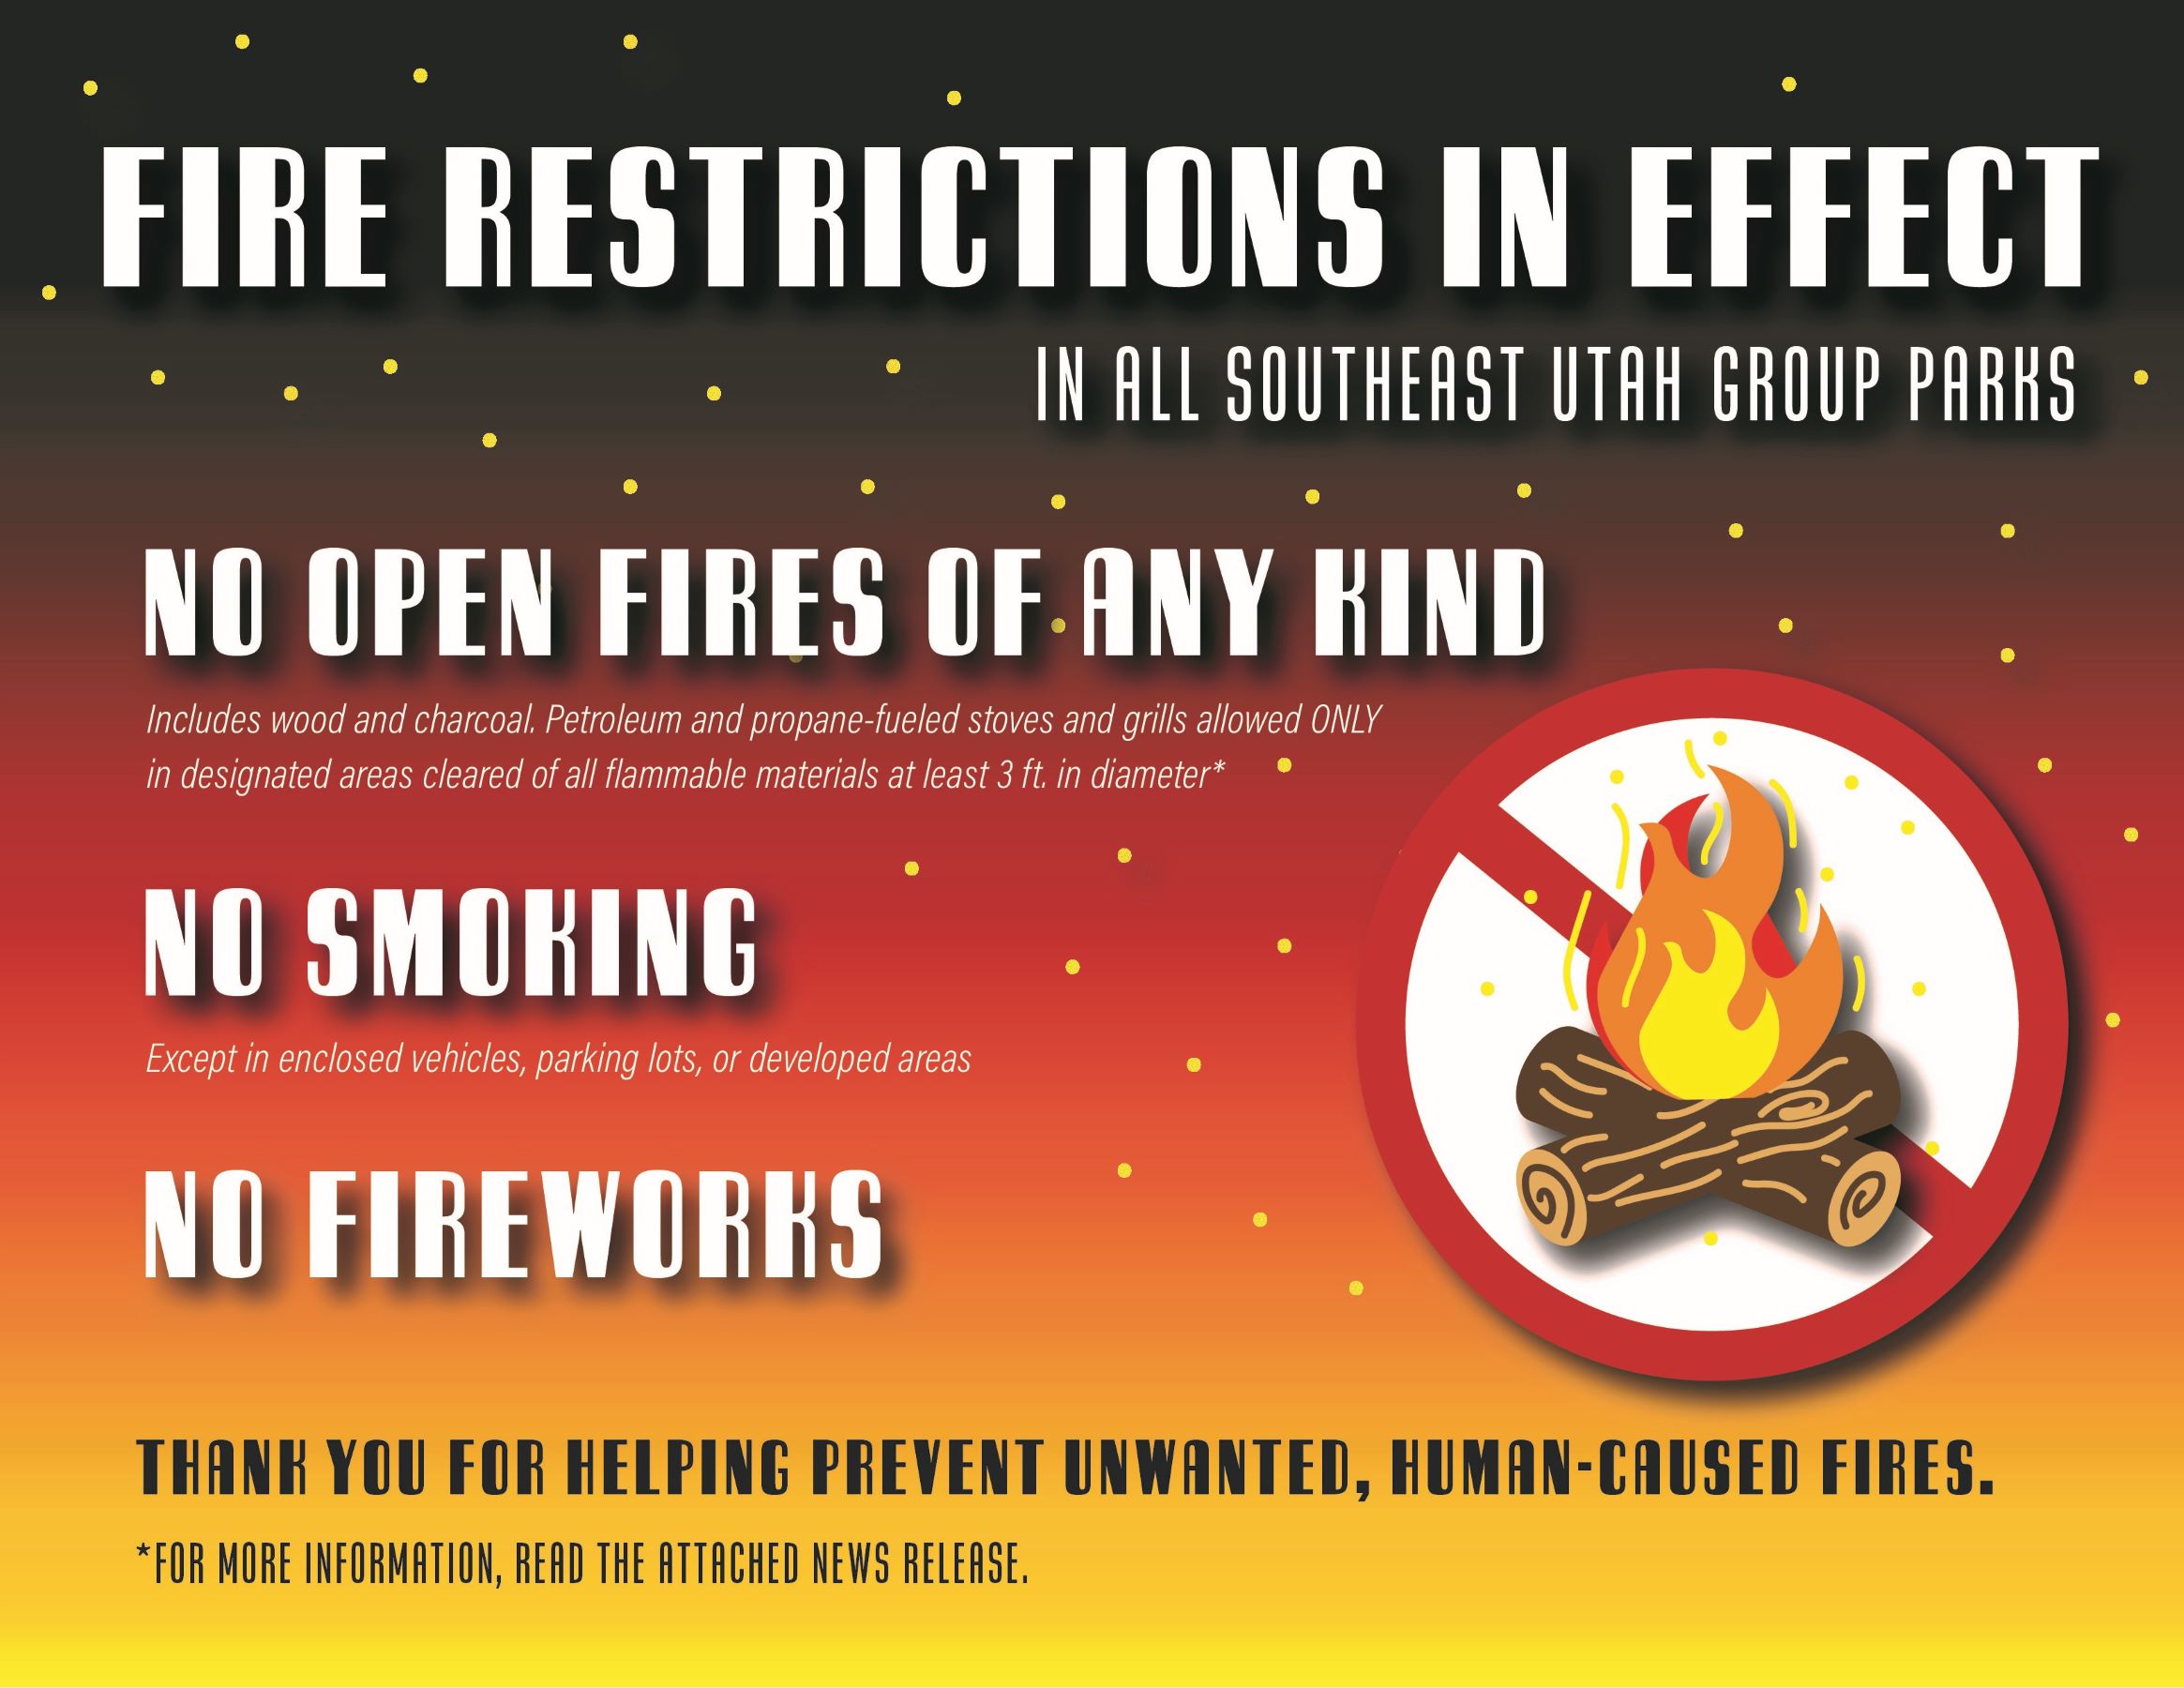 Multicolored graphic features a crossed-out campfire icon. White and black text highlights current fire restrictions for Southeast Utah Group parks: no open fires of any kind, no smoking, and no fireworks. More info available on park websites.